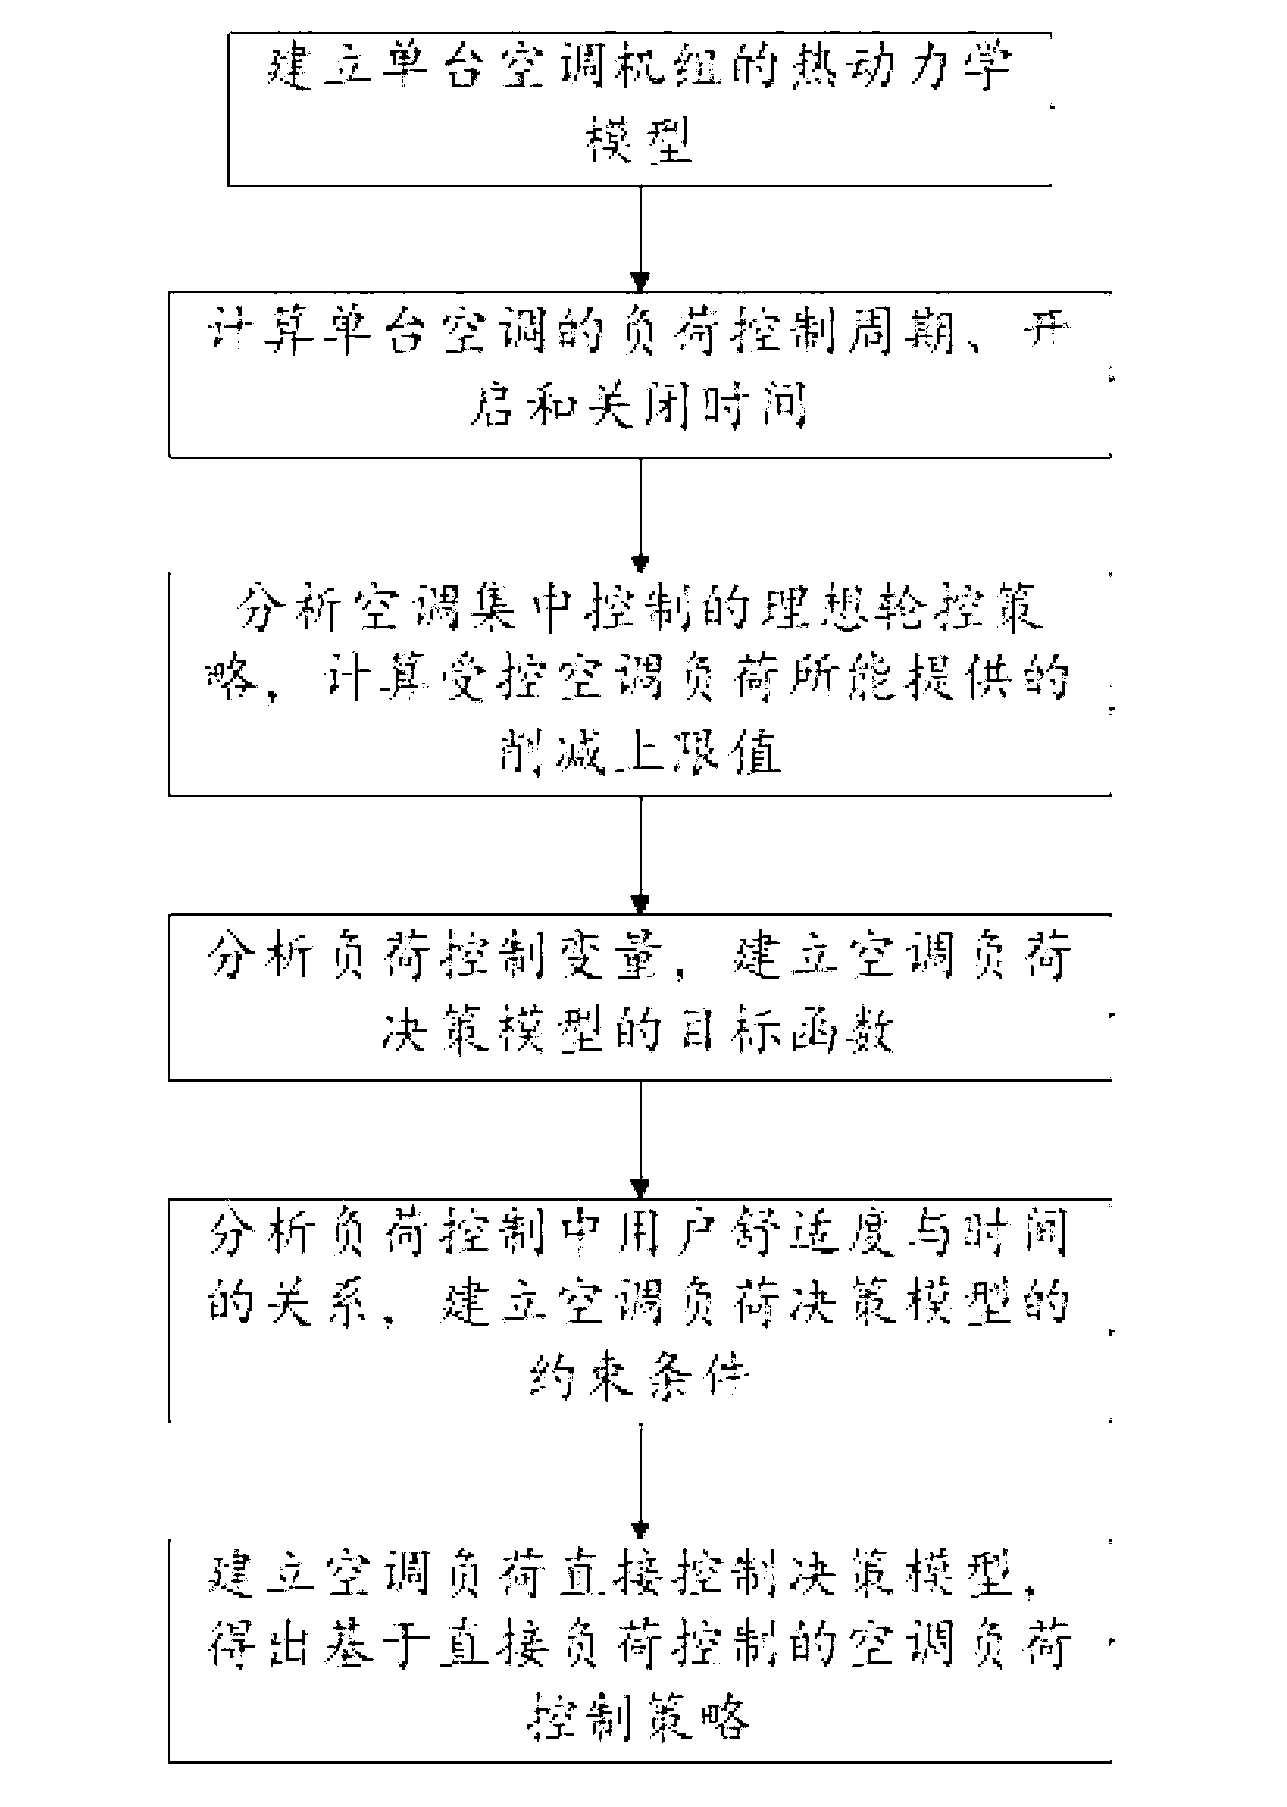 Air conditioning load control strategy making method based on direct load control